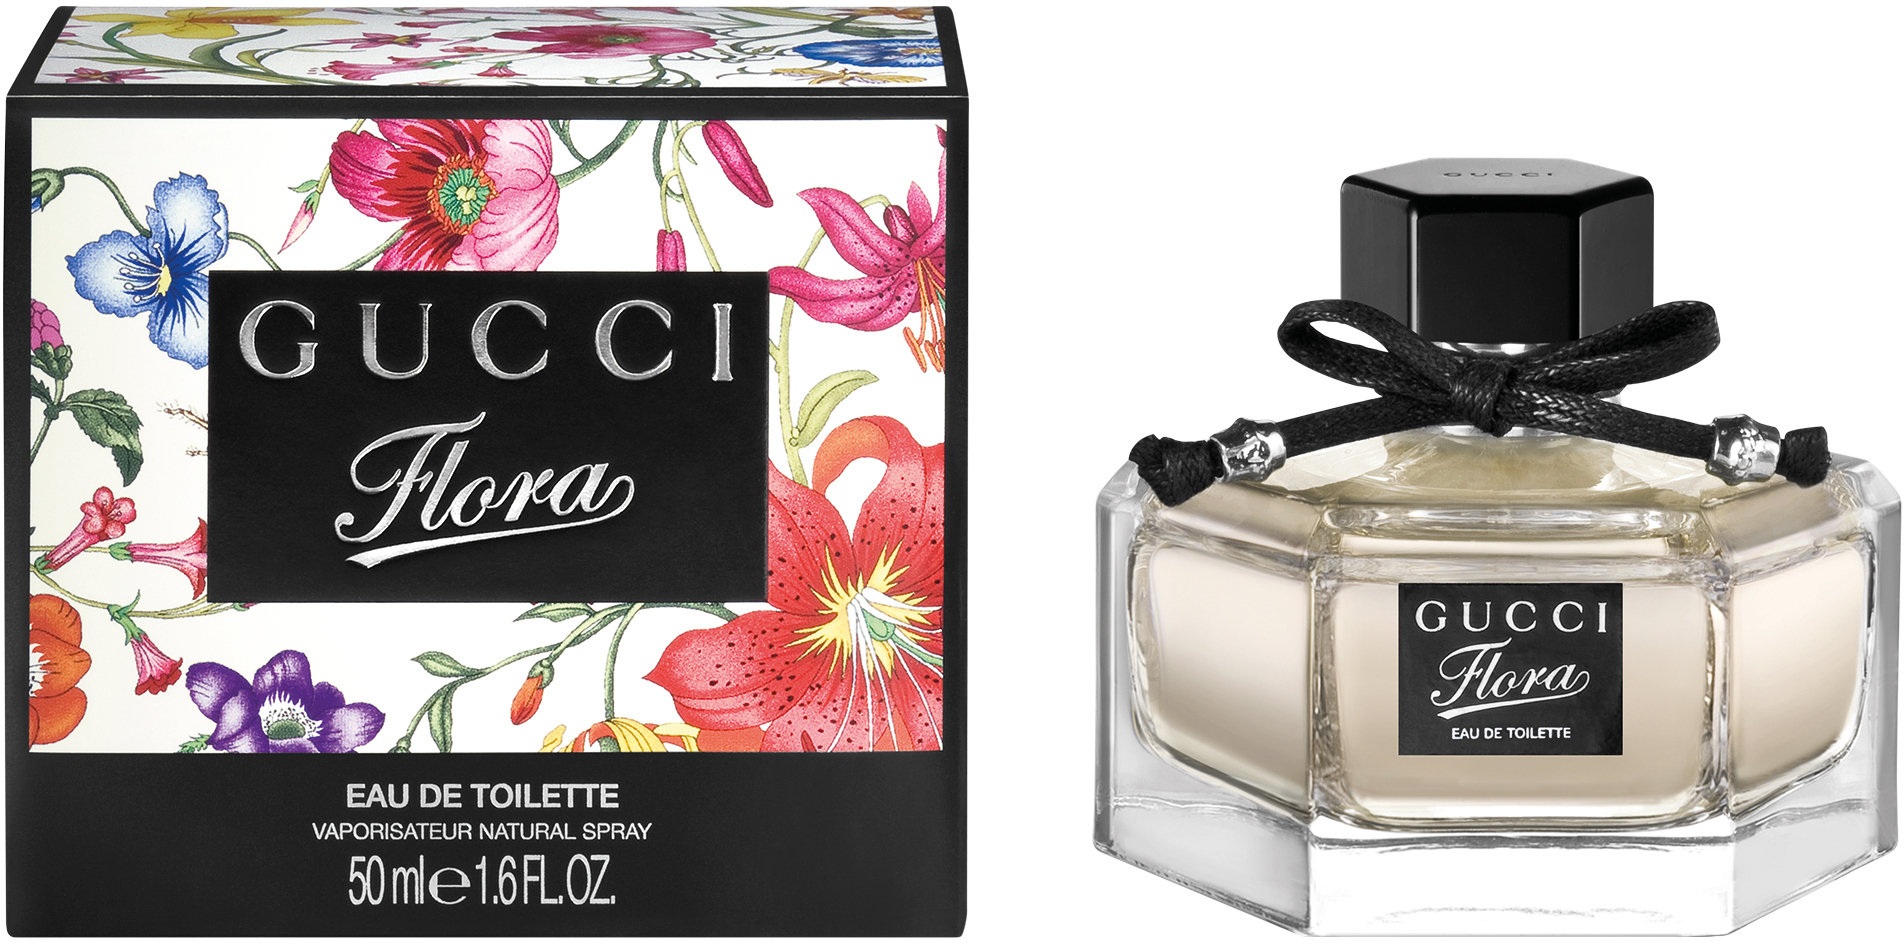 Gucci Flora EdT 50ml in duty-free at 